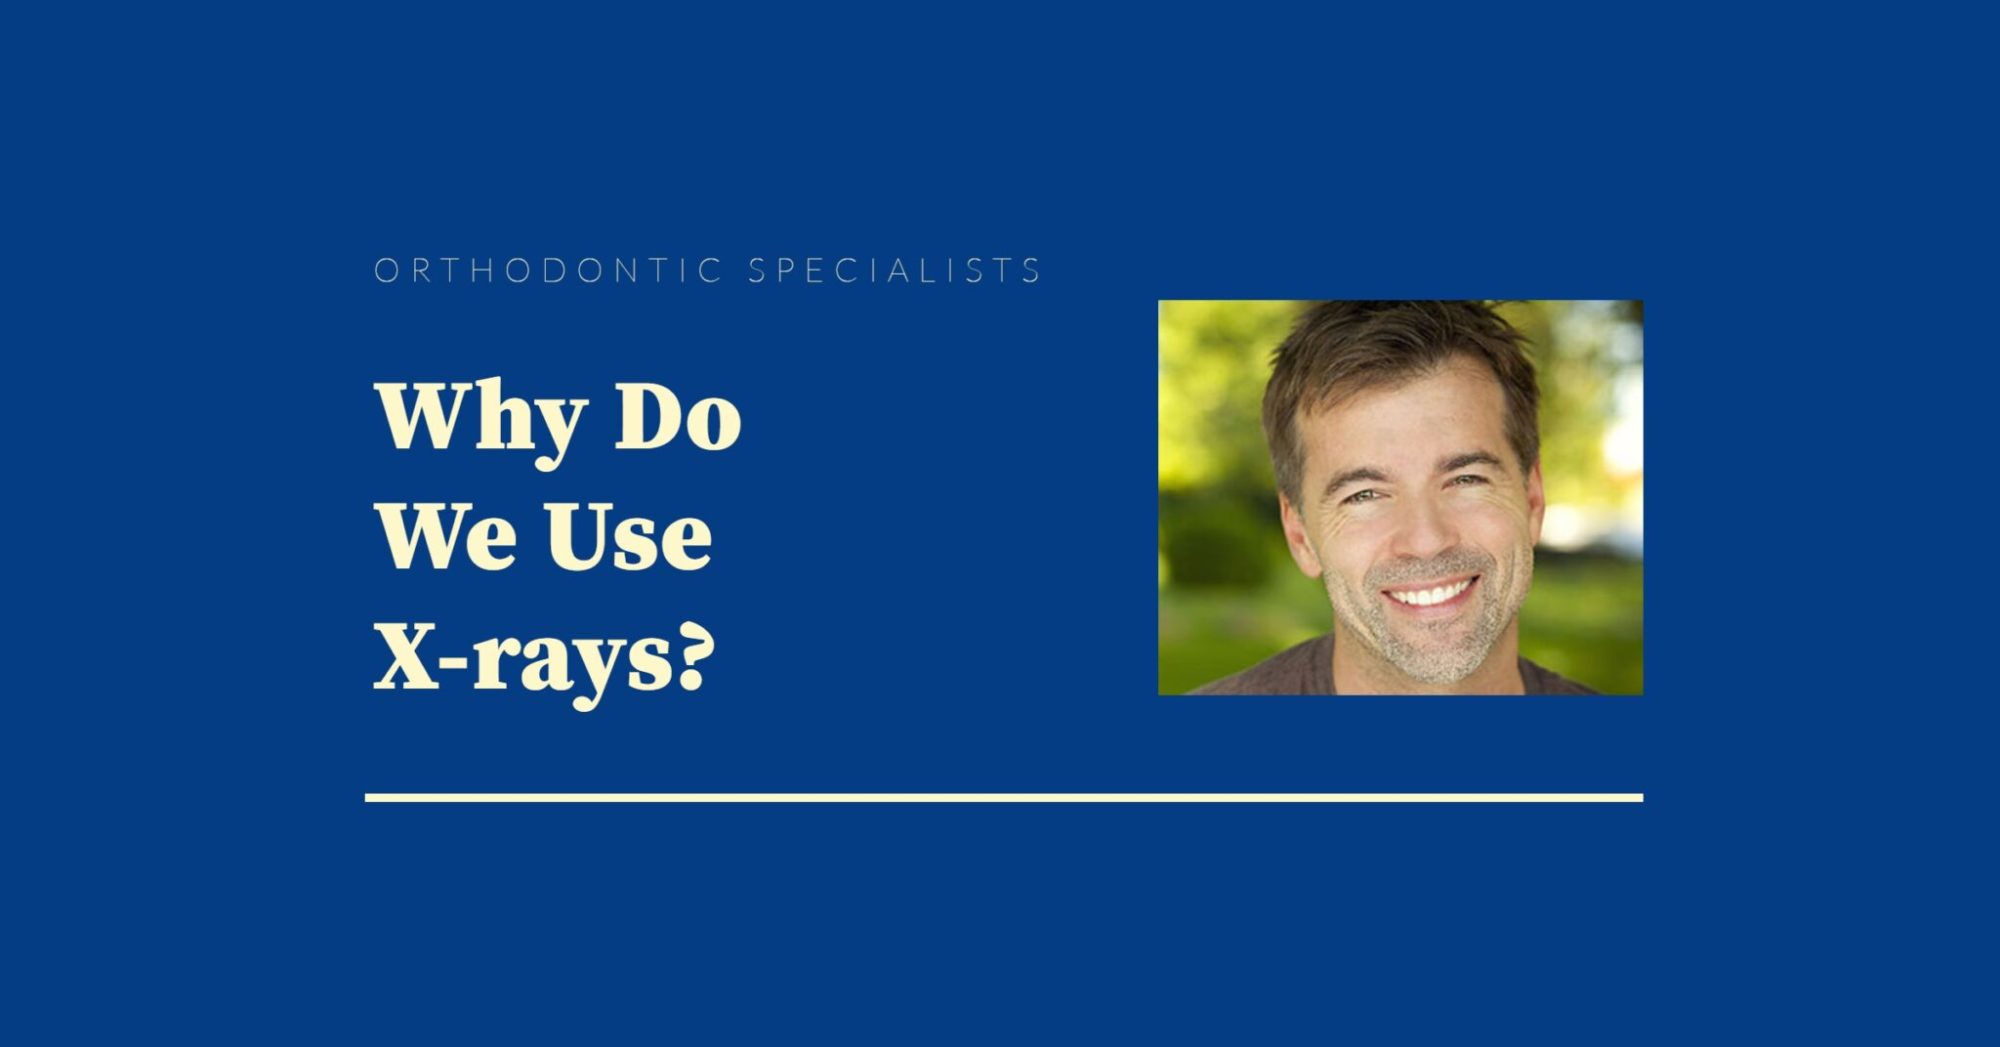 Why Do We Use X-rays